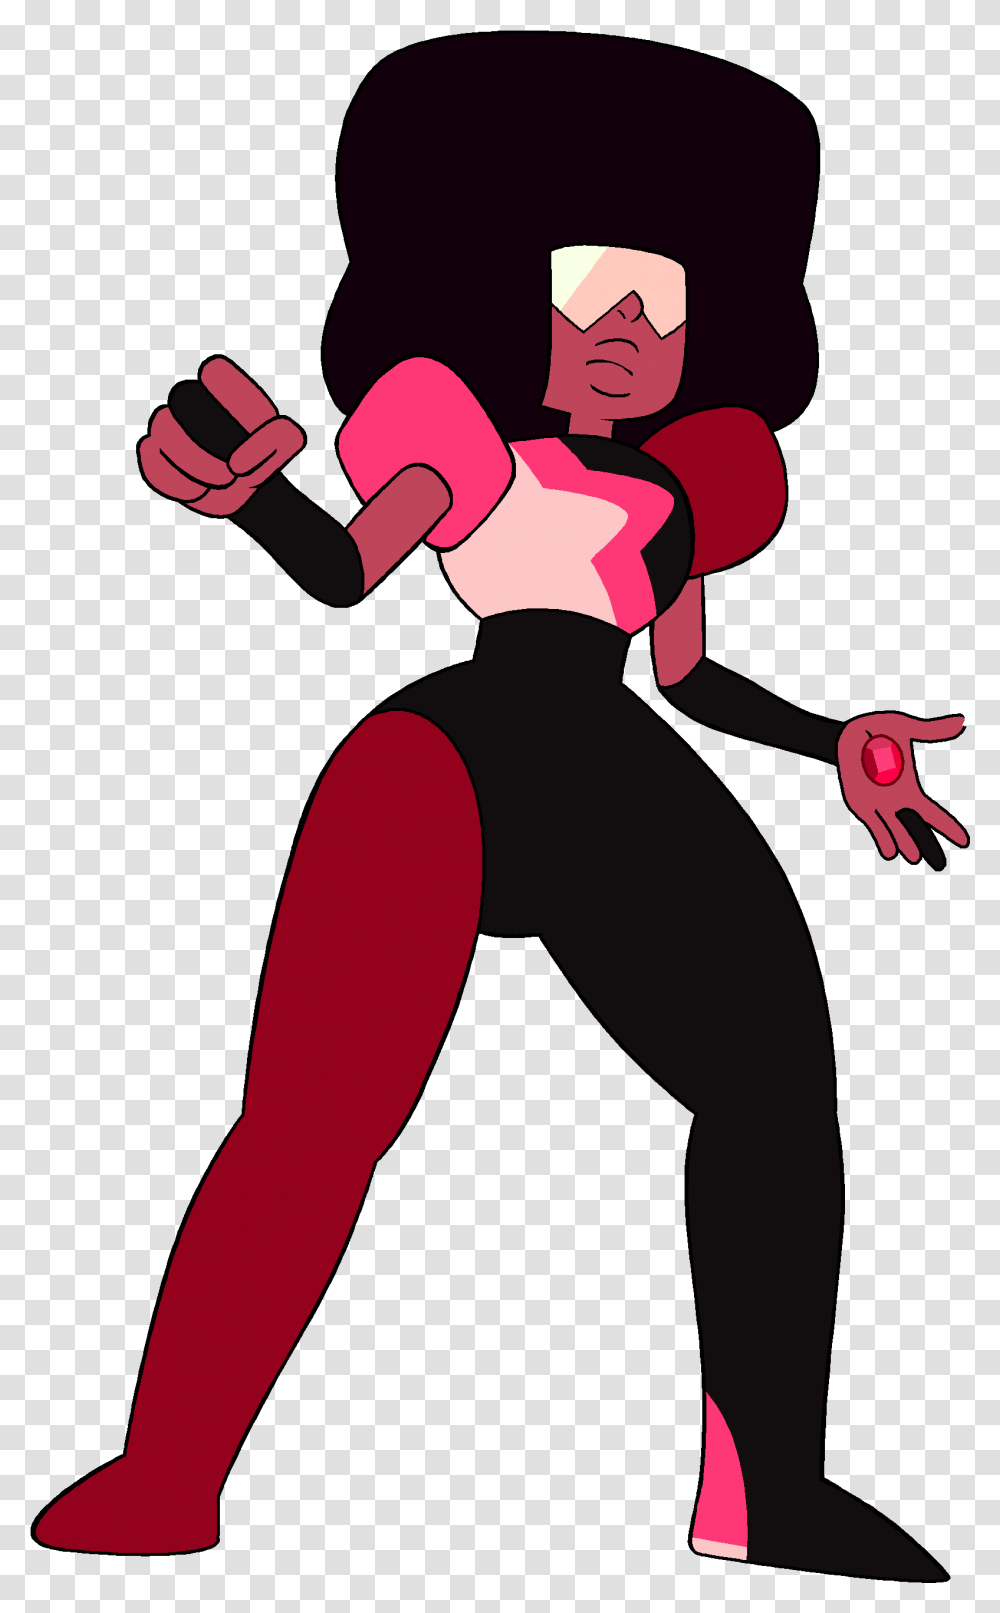 Thumb Image Garnet Steven Universe Characters, Person, Hand, Dance Pose, Leisure Activities Transparent Png